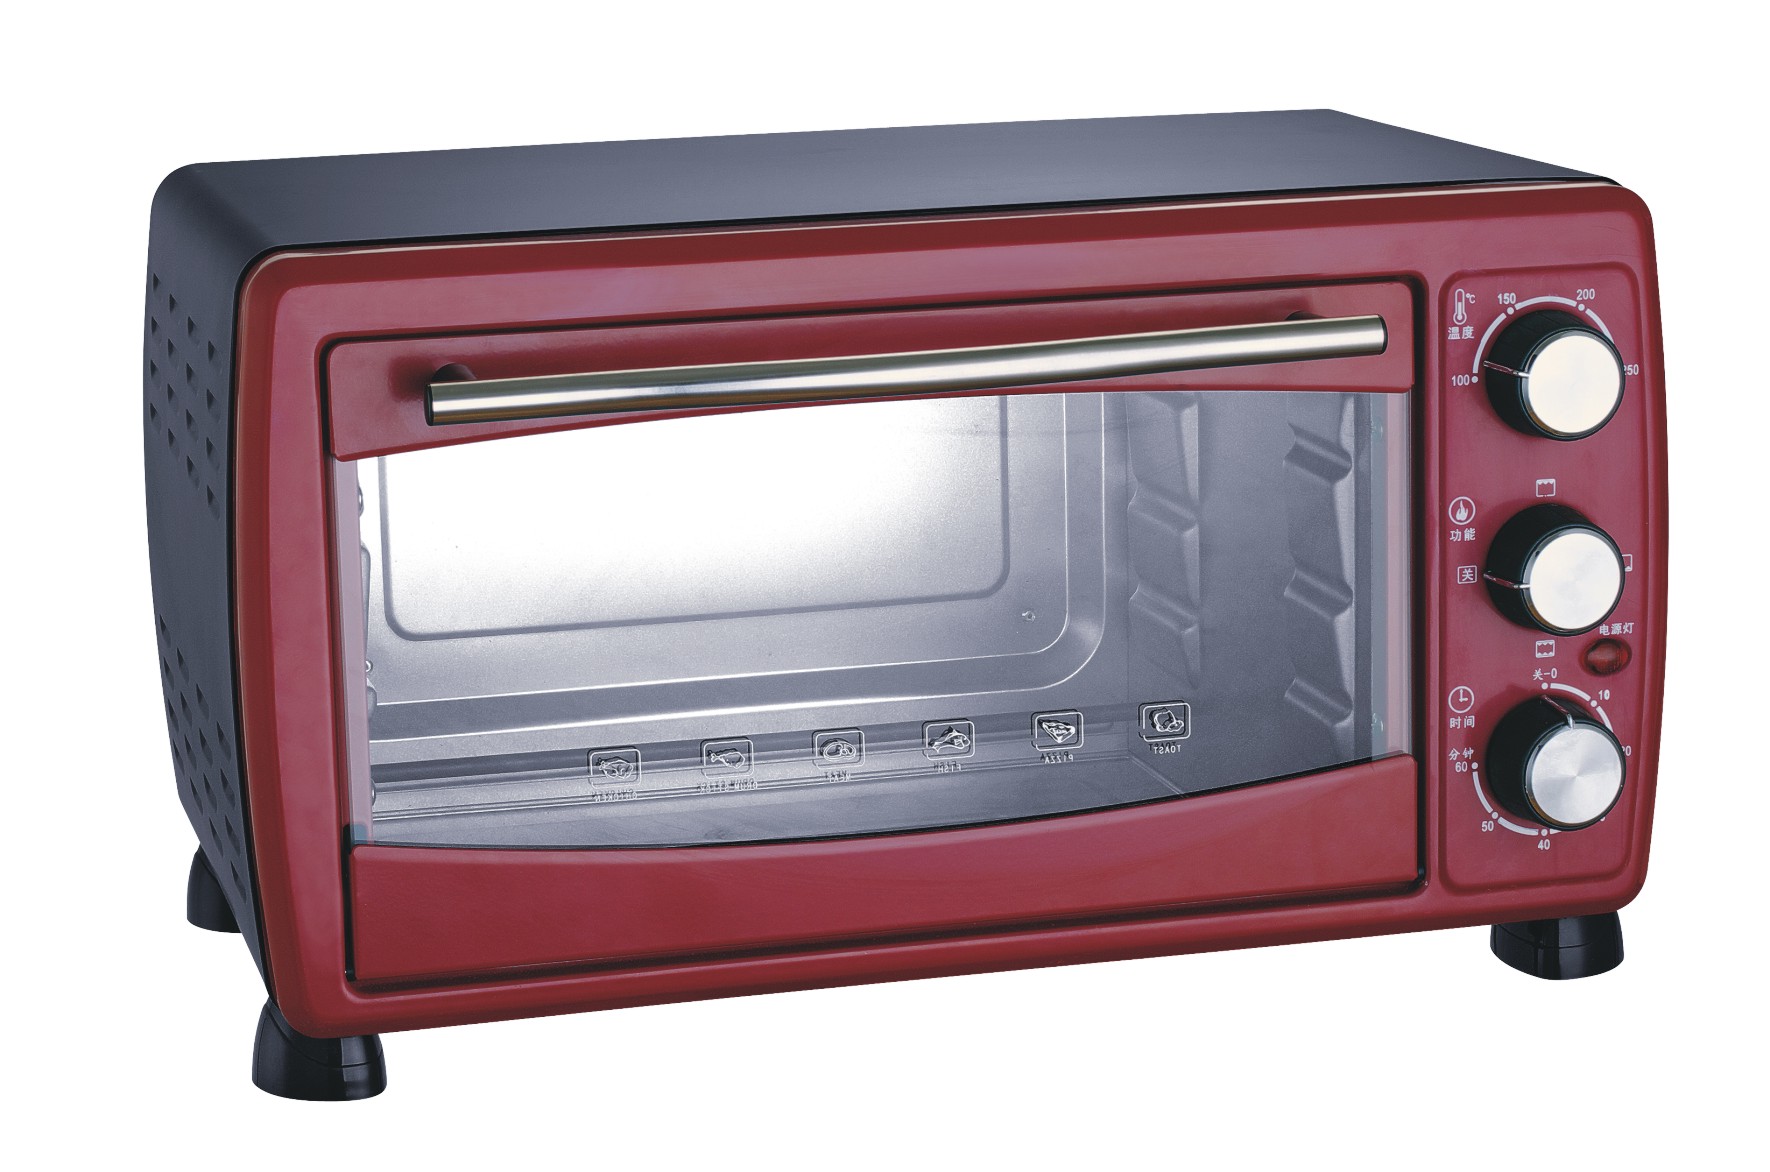  Electric Ovens with well treated assembly